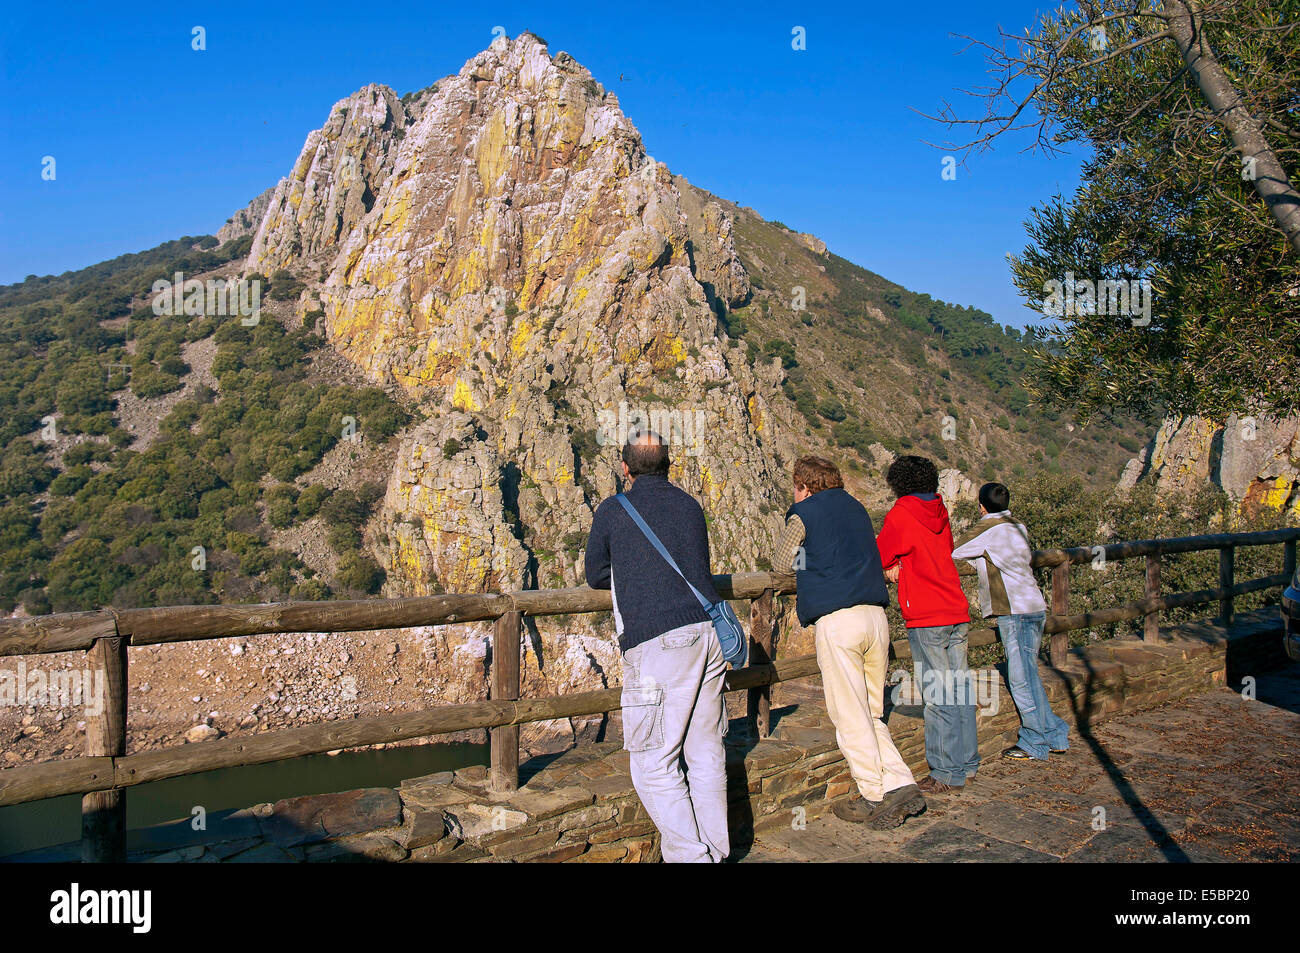 The Pena Falcon Cliff, Lookout point, Monfrague Natural Park, Caceres, Region of Extremadura, Spain, Europe Stock Photo